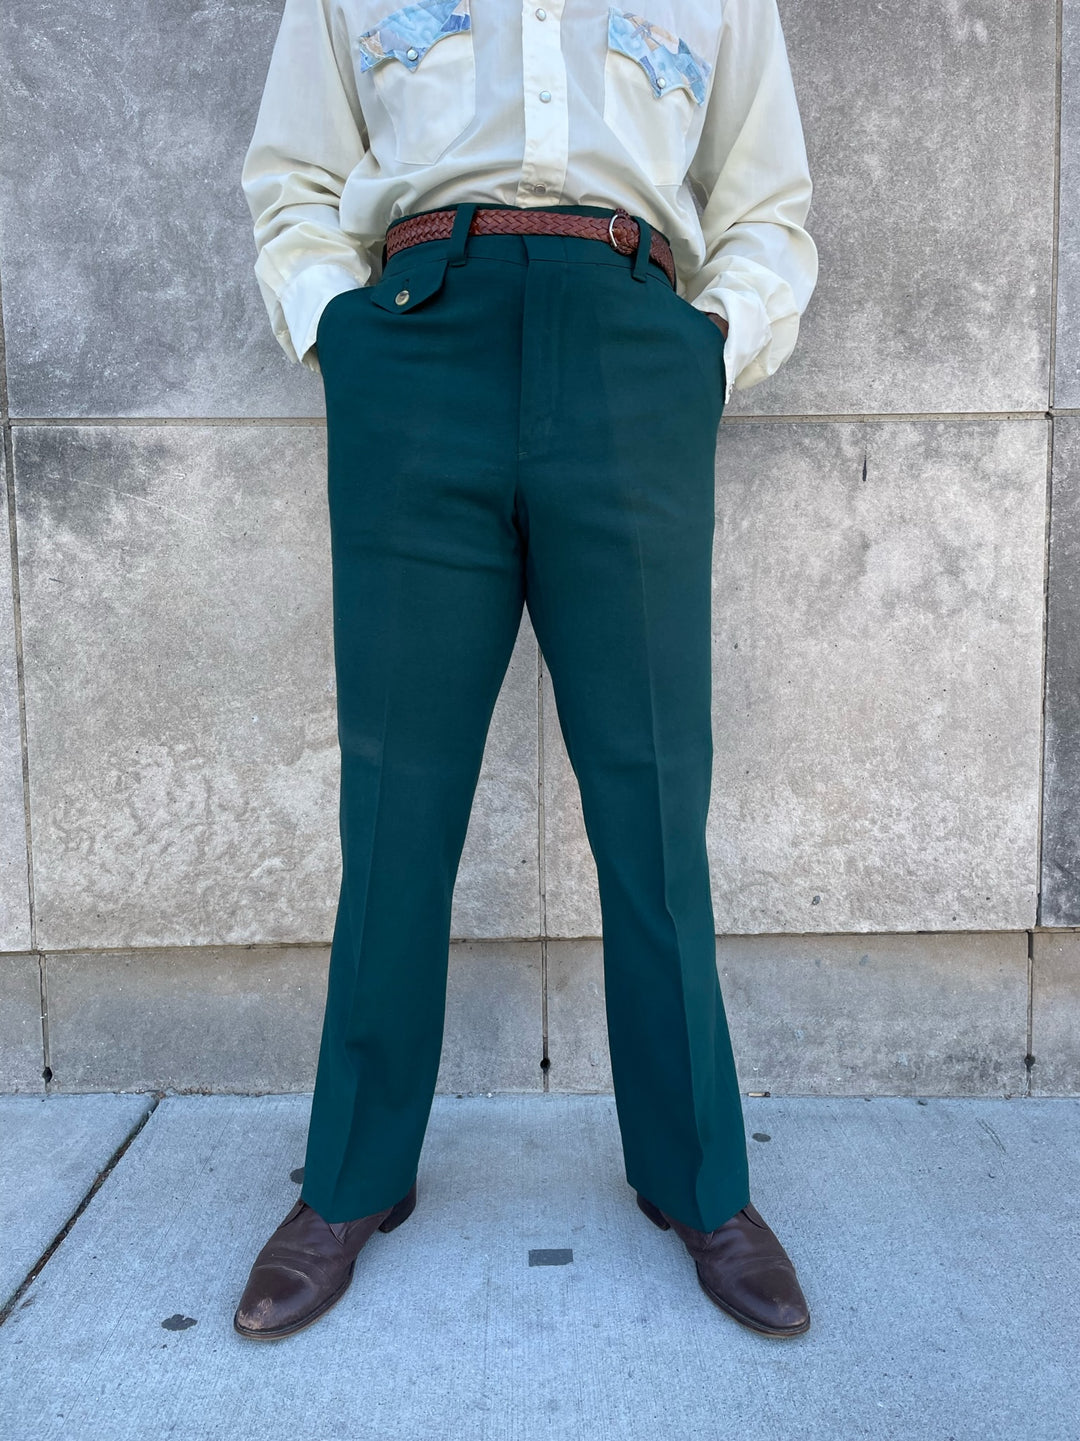 Mens 70s Vintage Green Bell Bottom Polyester Pants, Levis Panatela Signature Collection